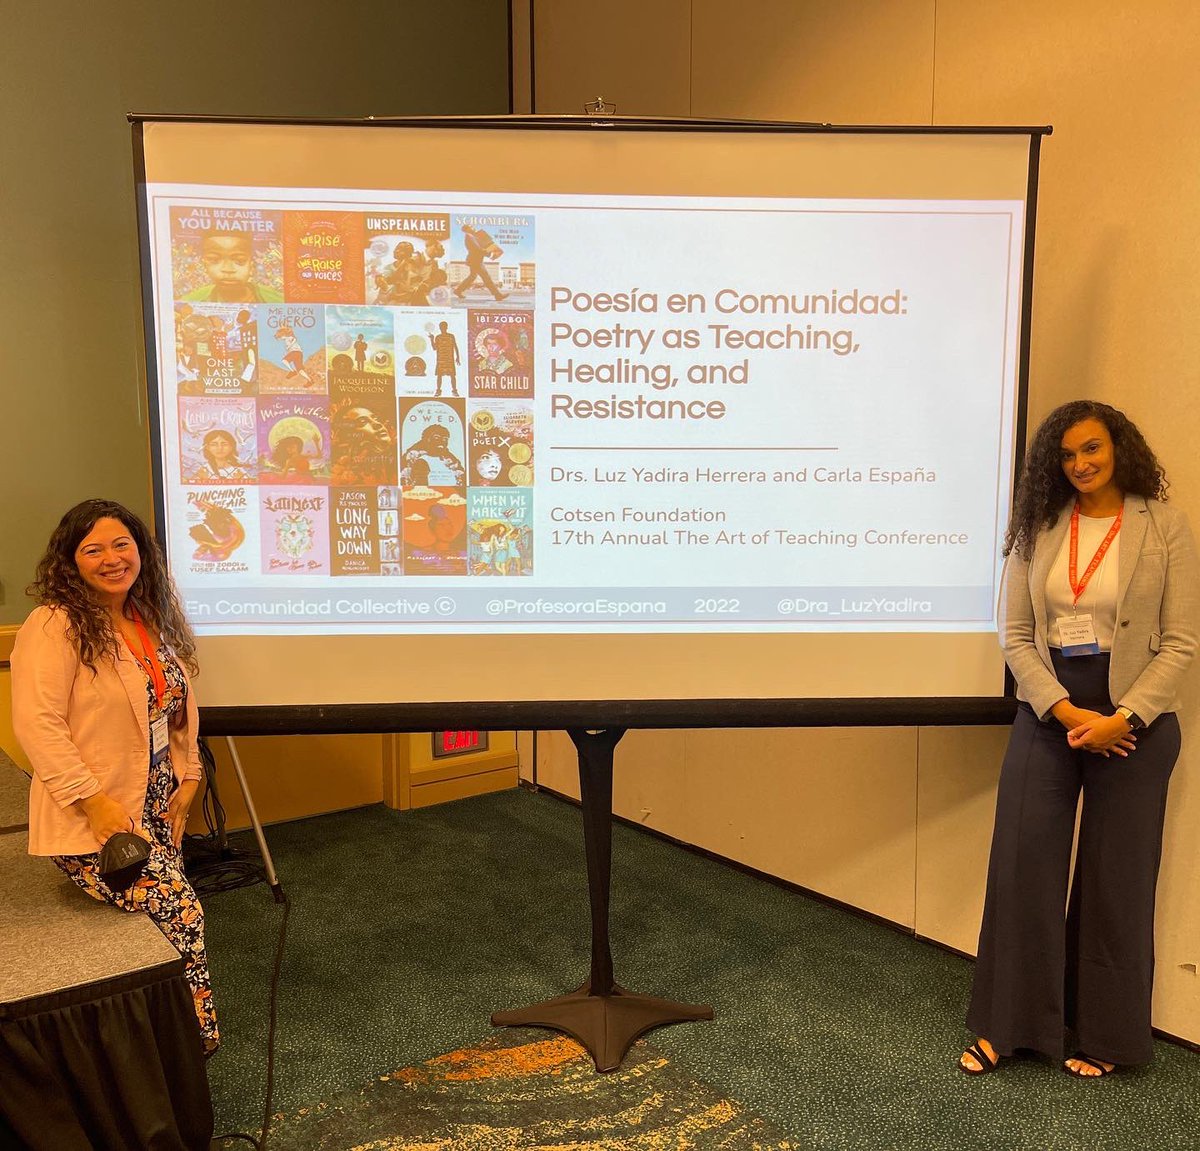 Thank you @CotsenAoT for a wonderful conference. What an engaged group of teachers 🙌🏼 Loved presenting with @Dra_LuzYadira, seeing our book at the conference, and connecting with friends.